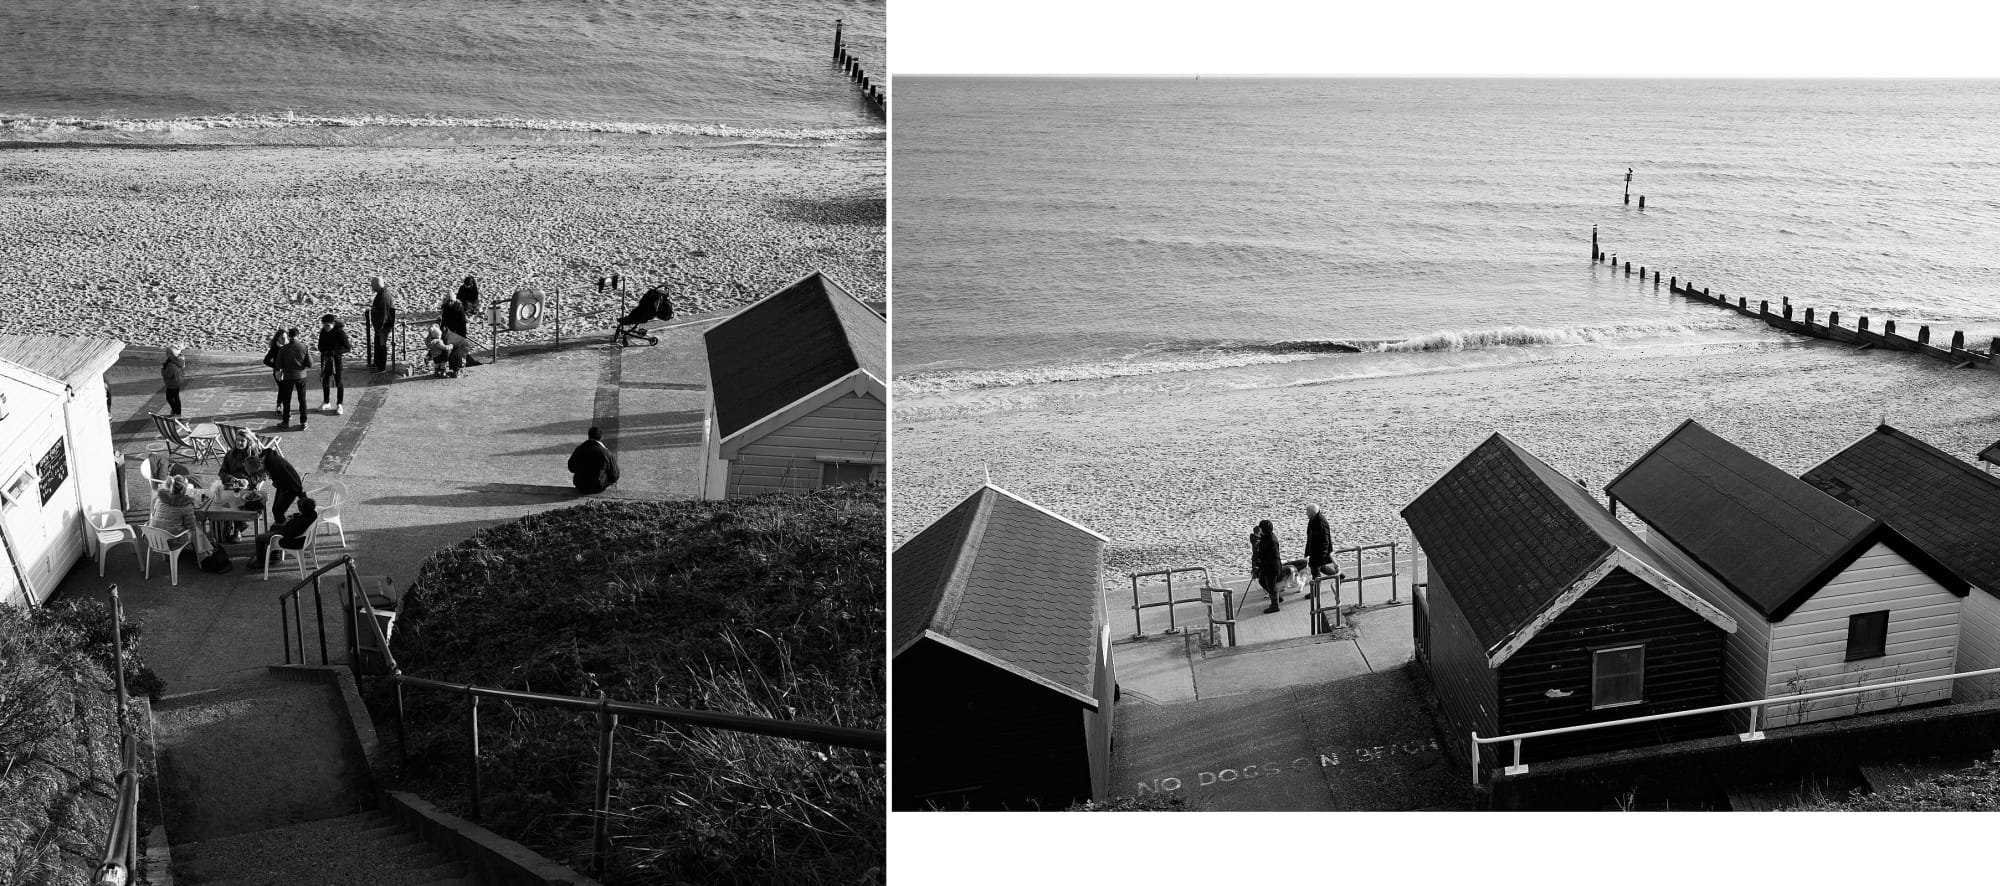 steps down to seafront cafe / looking down on seafront beach huts